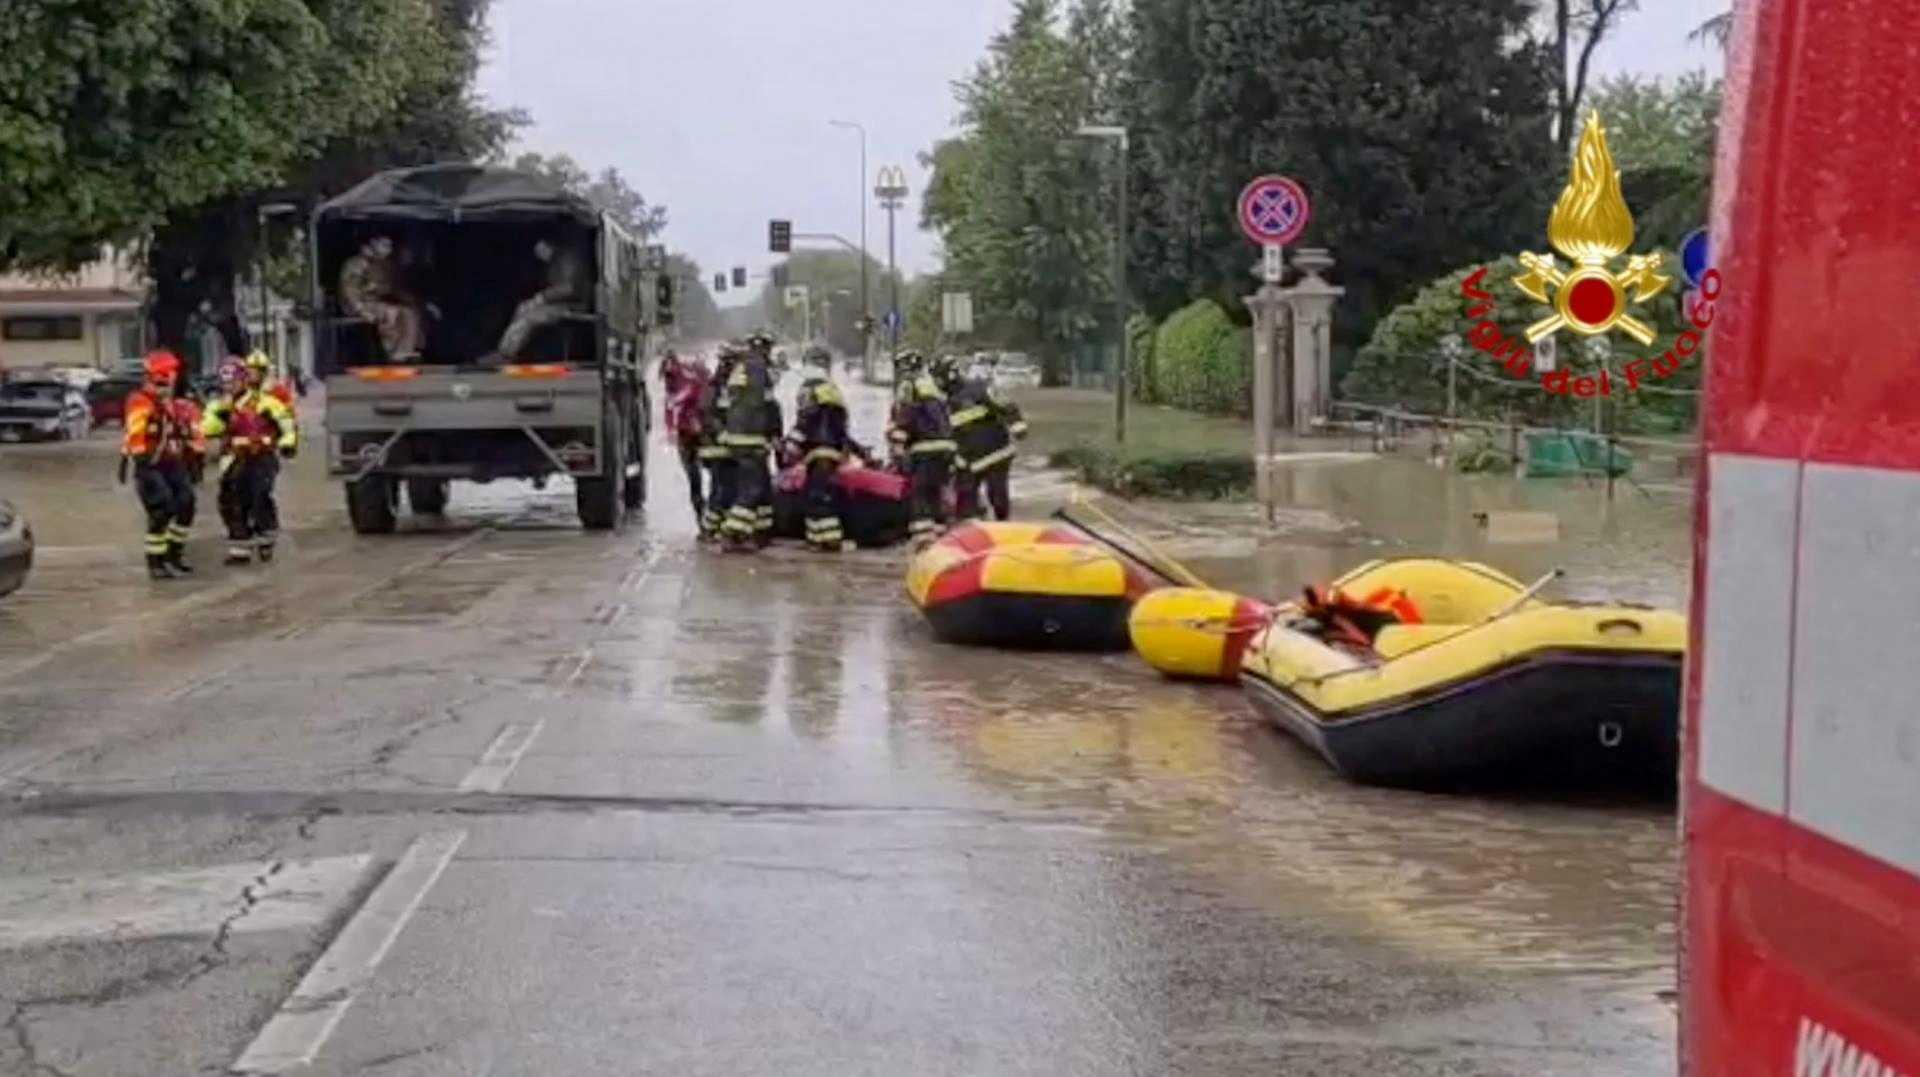 Firefighters and rescuers are seen next to boats during rescue operations in Faenza, Italy after floods hit Italy's northern Emilia-Romagna region, in this handout image released May 17. Photo: Reuters